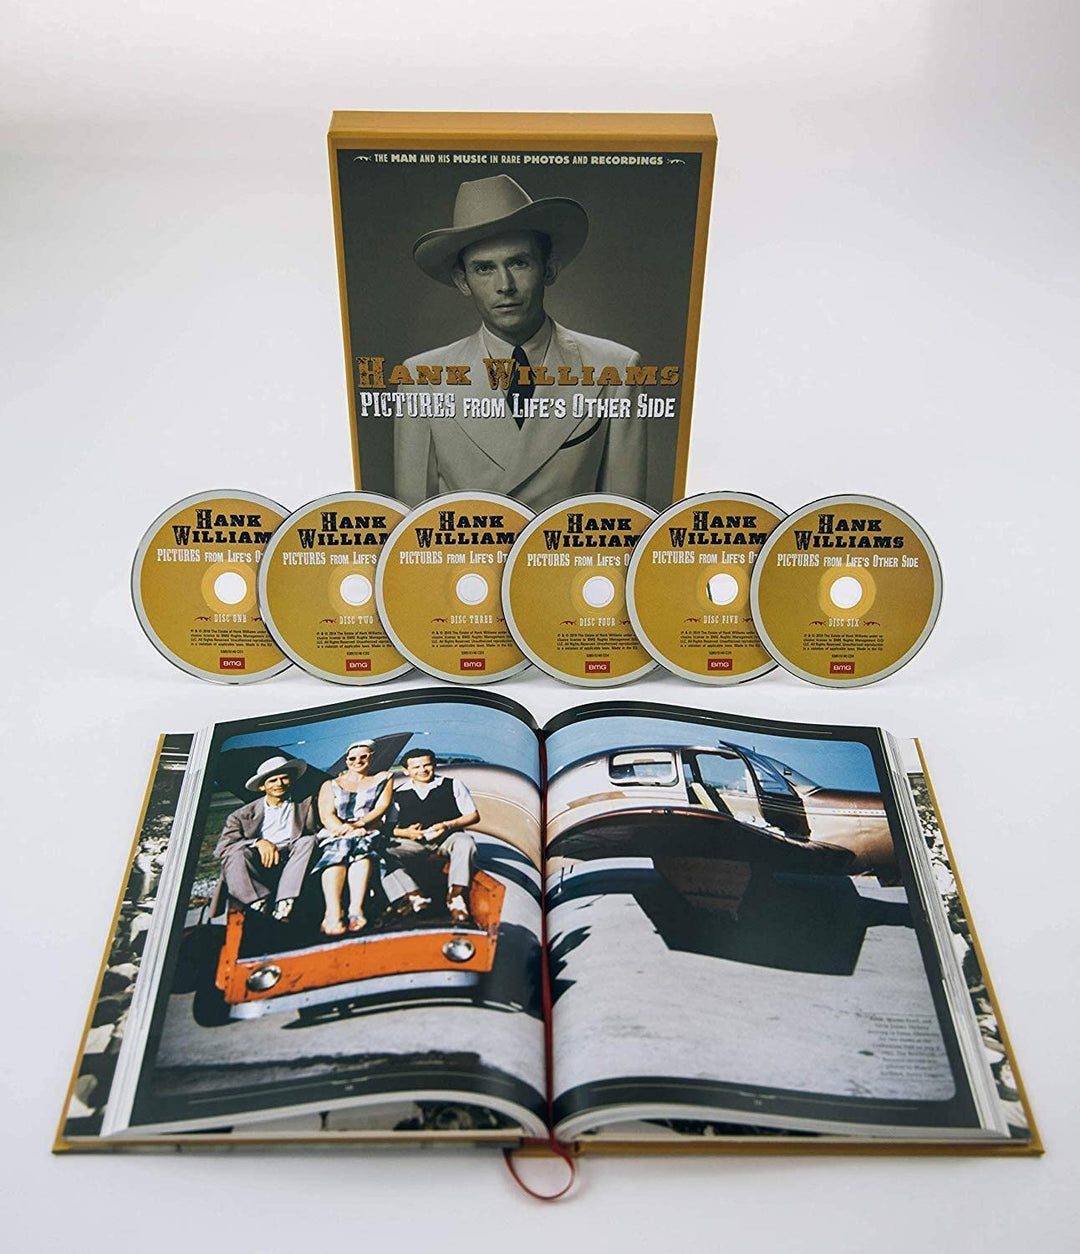 Hank Williams - Pictures From Life's Other Side: The Man and His Music in Rare Recordings and Photos [Audio CD]